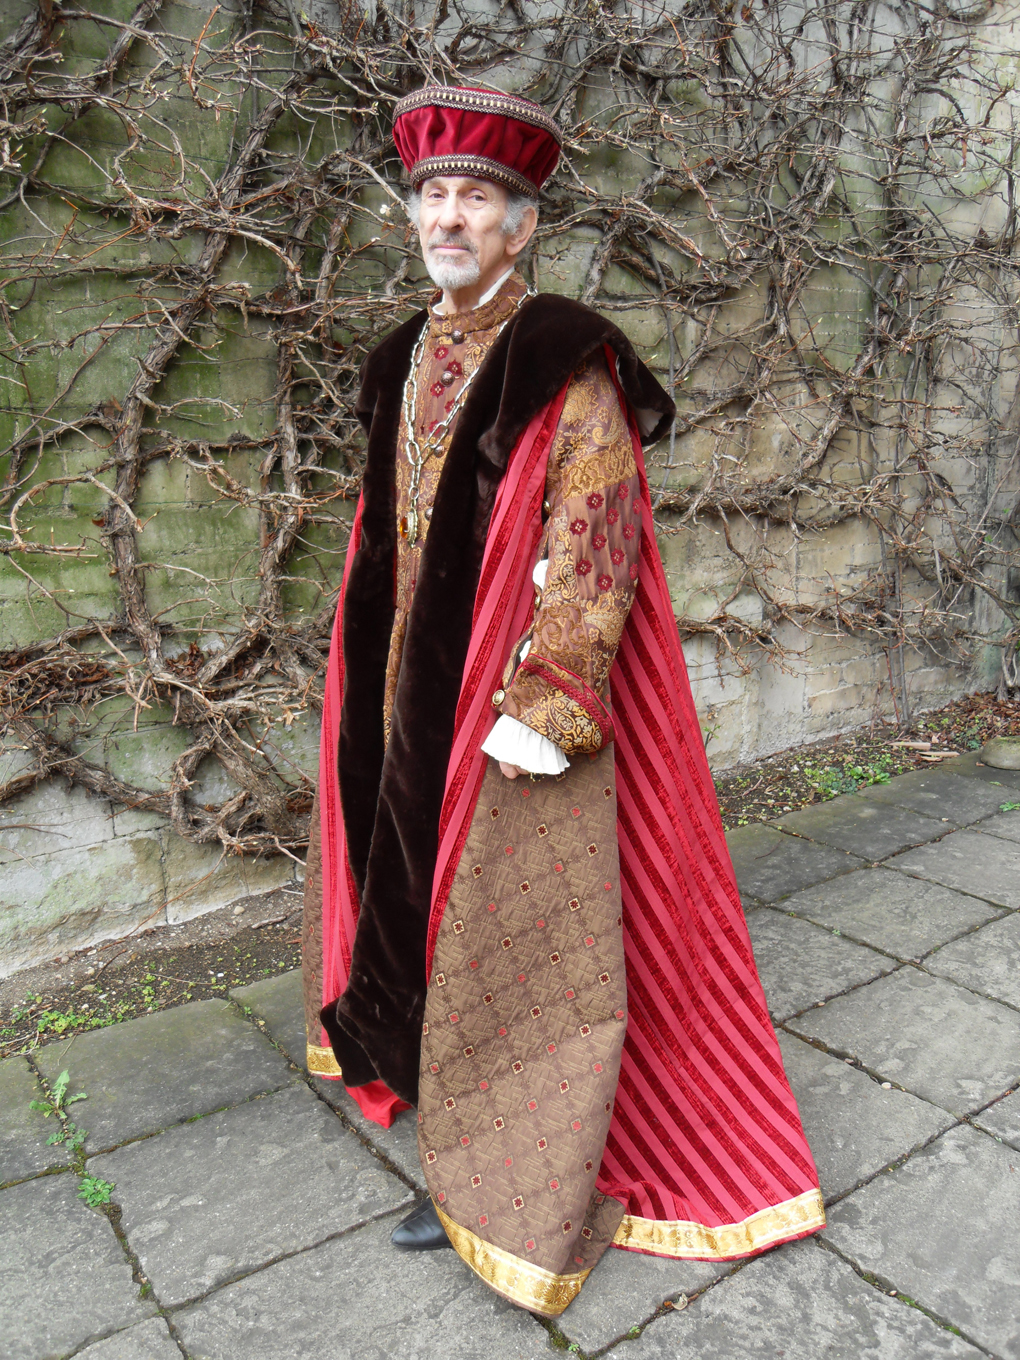 Actor in Lord Capulet costume for forthcoming production of Romeo and Juliet